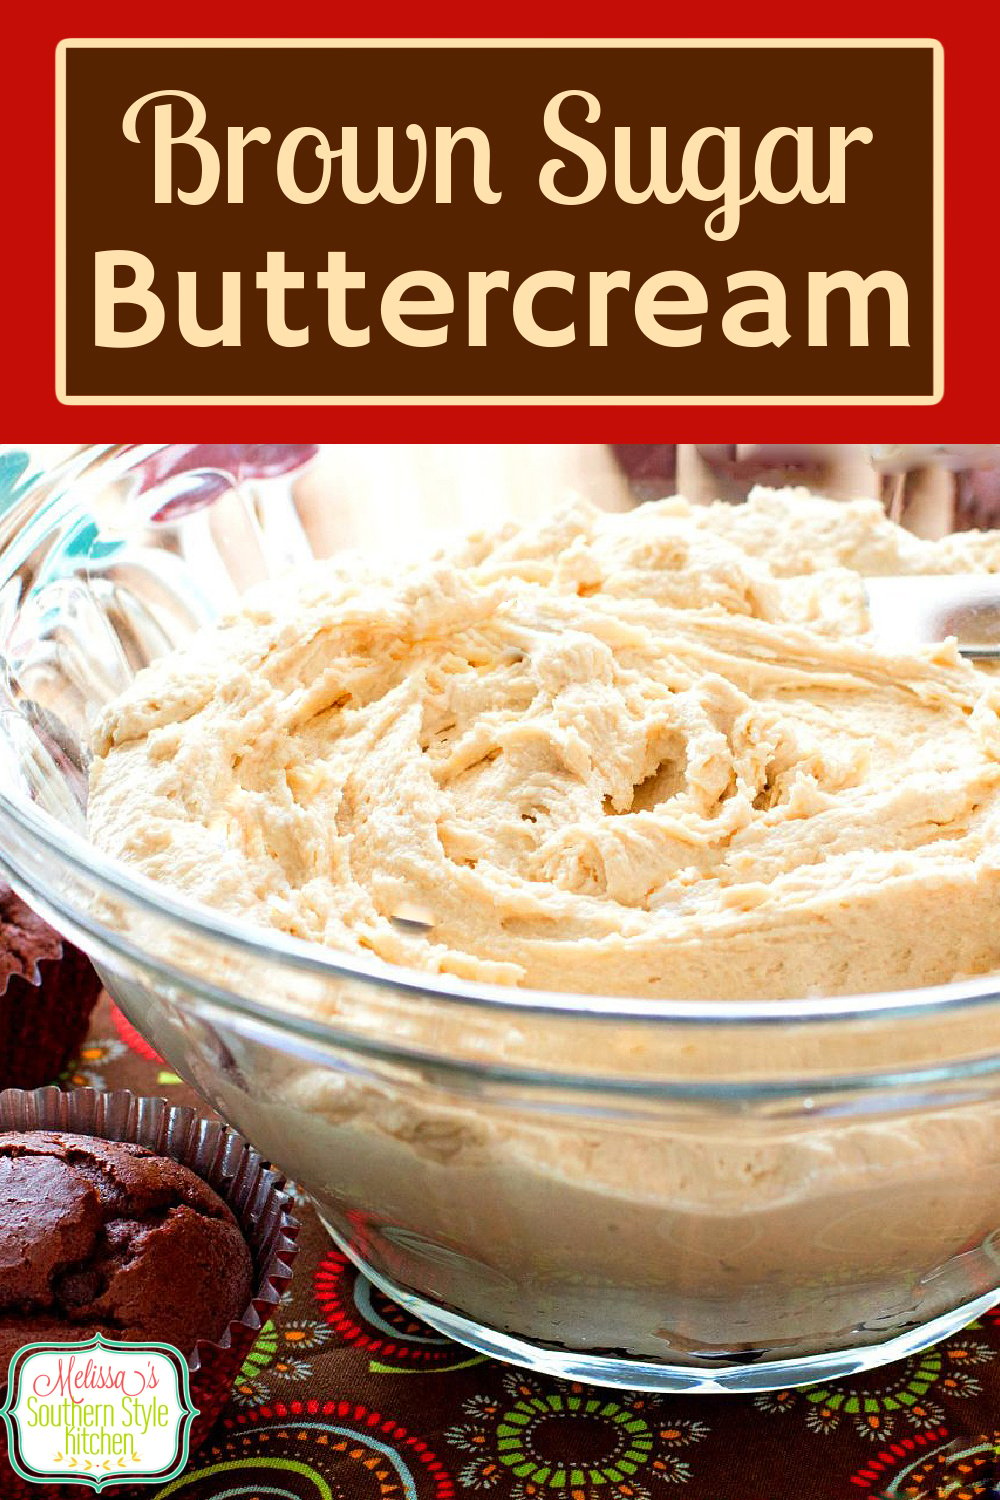 You'll elevate your cake frostings with this rich and buttery homemade Brown Sugar Buttercream for slathering on cakes, cupcakes and muffins. #brownsugarfrosting #brownsugarbuttercream #buttercreamrecipes #cakefrosting #icingrecipes #desserts #southernrecipes via @melissasssk